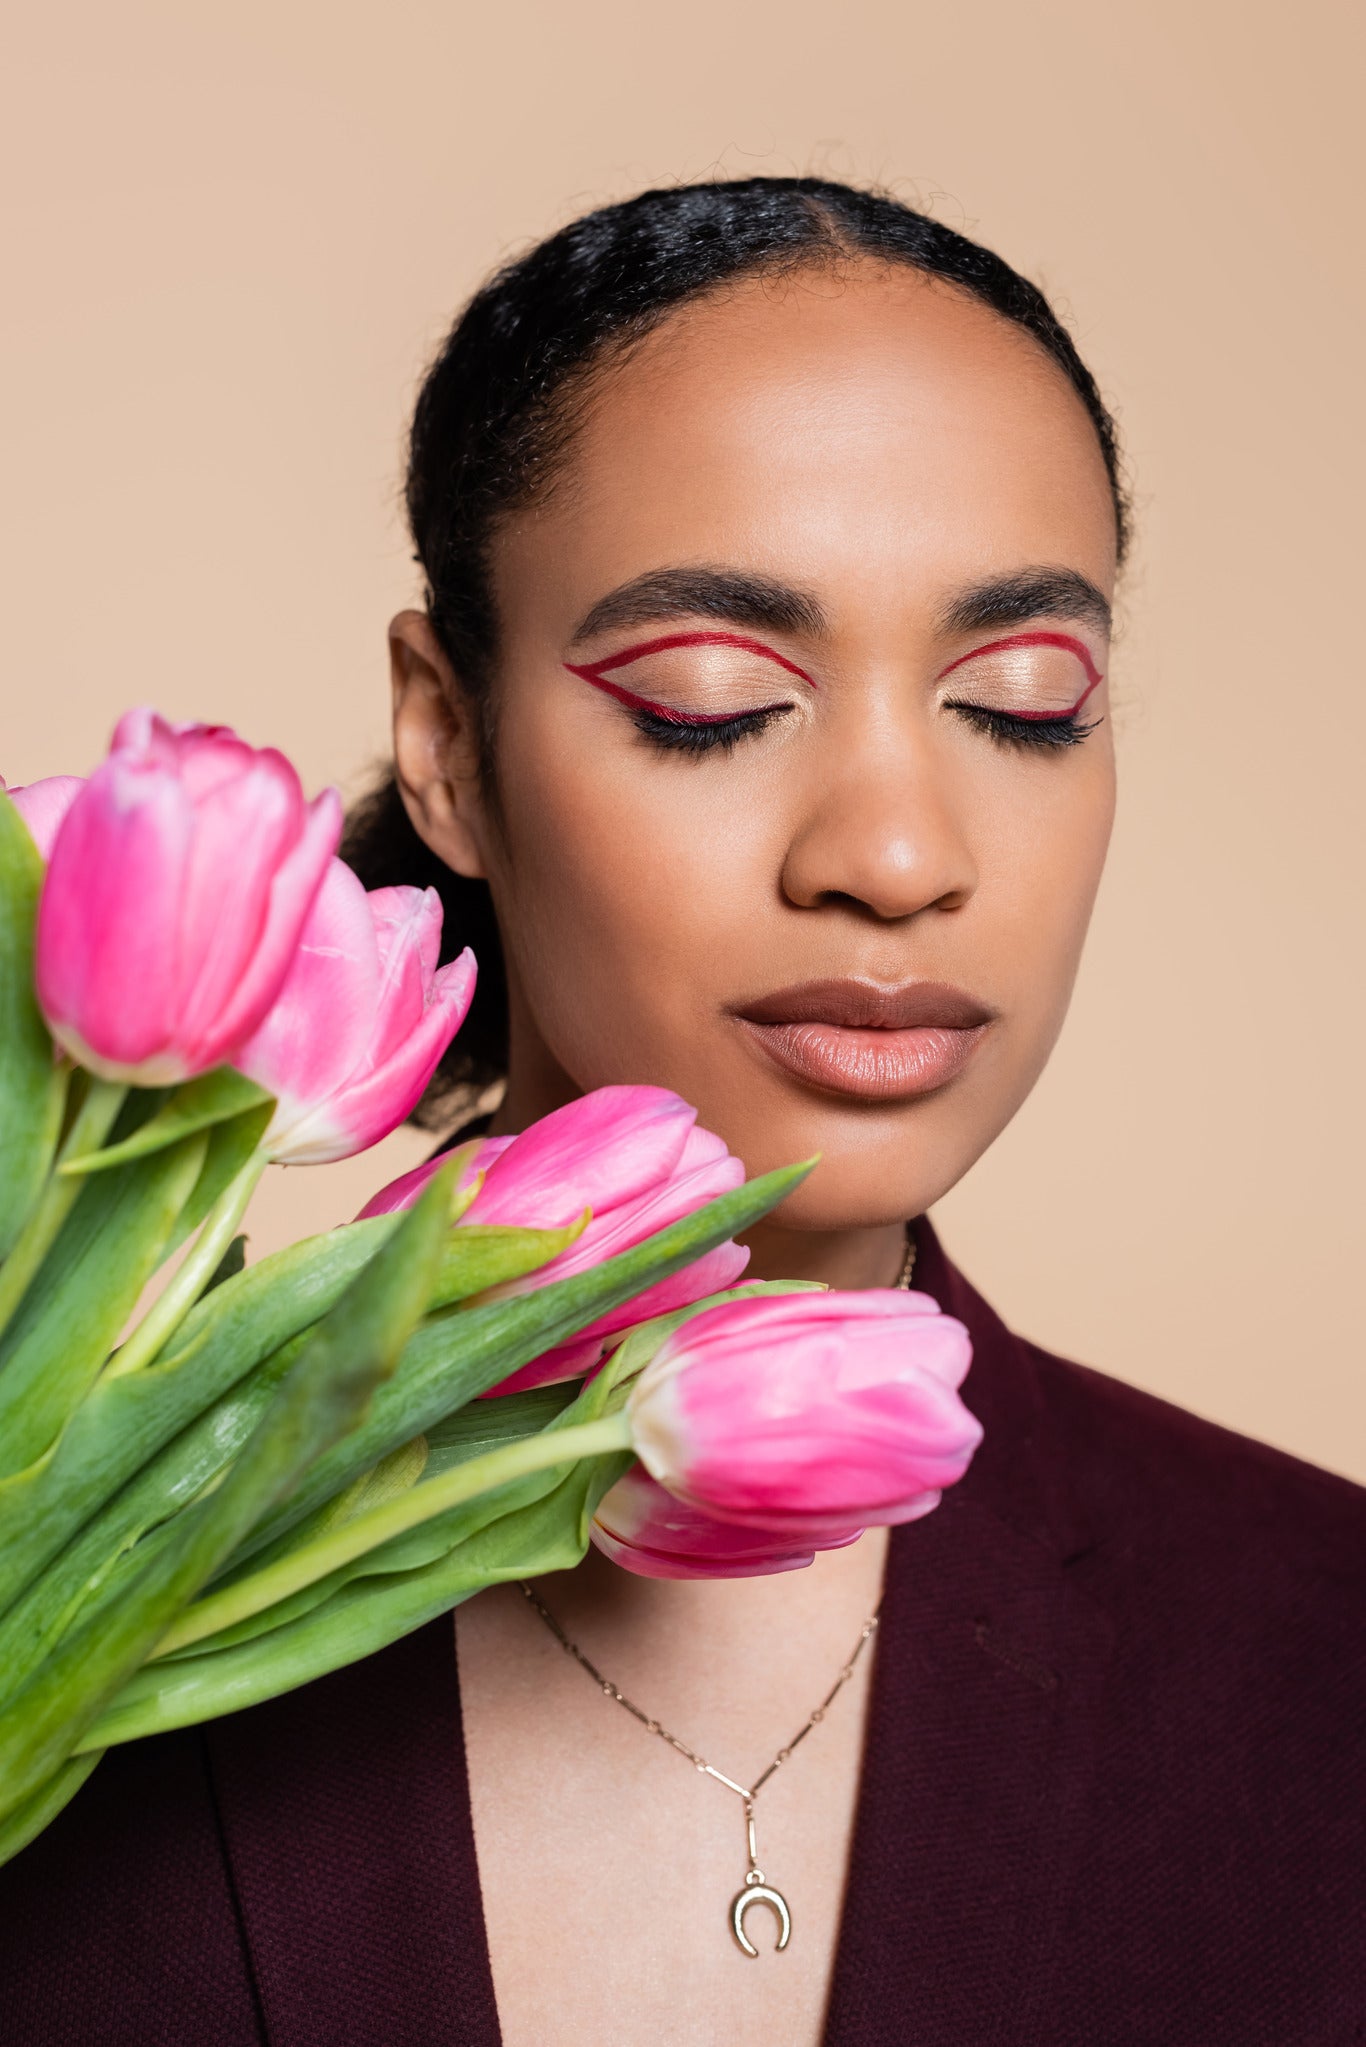 woman with red eye makeup and pink flowers 